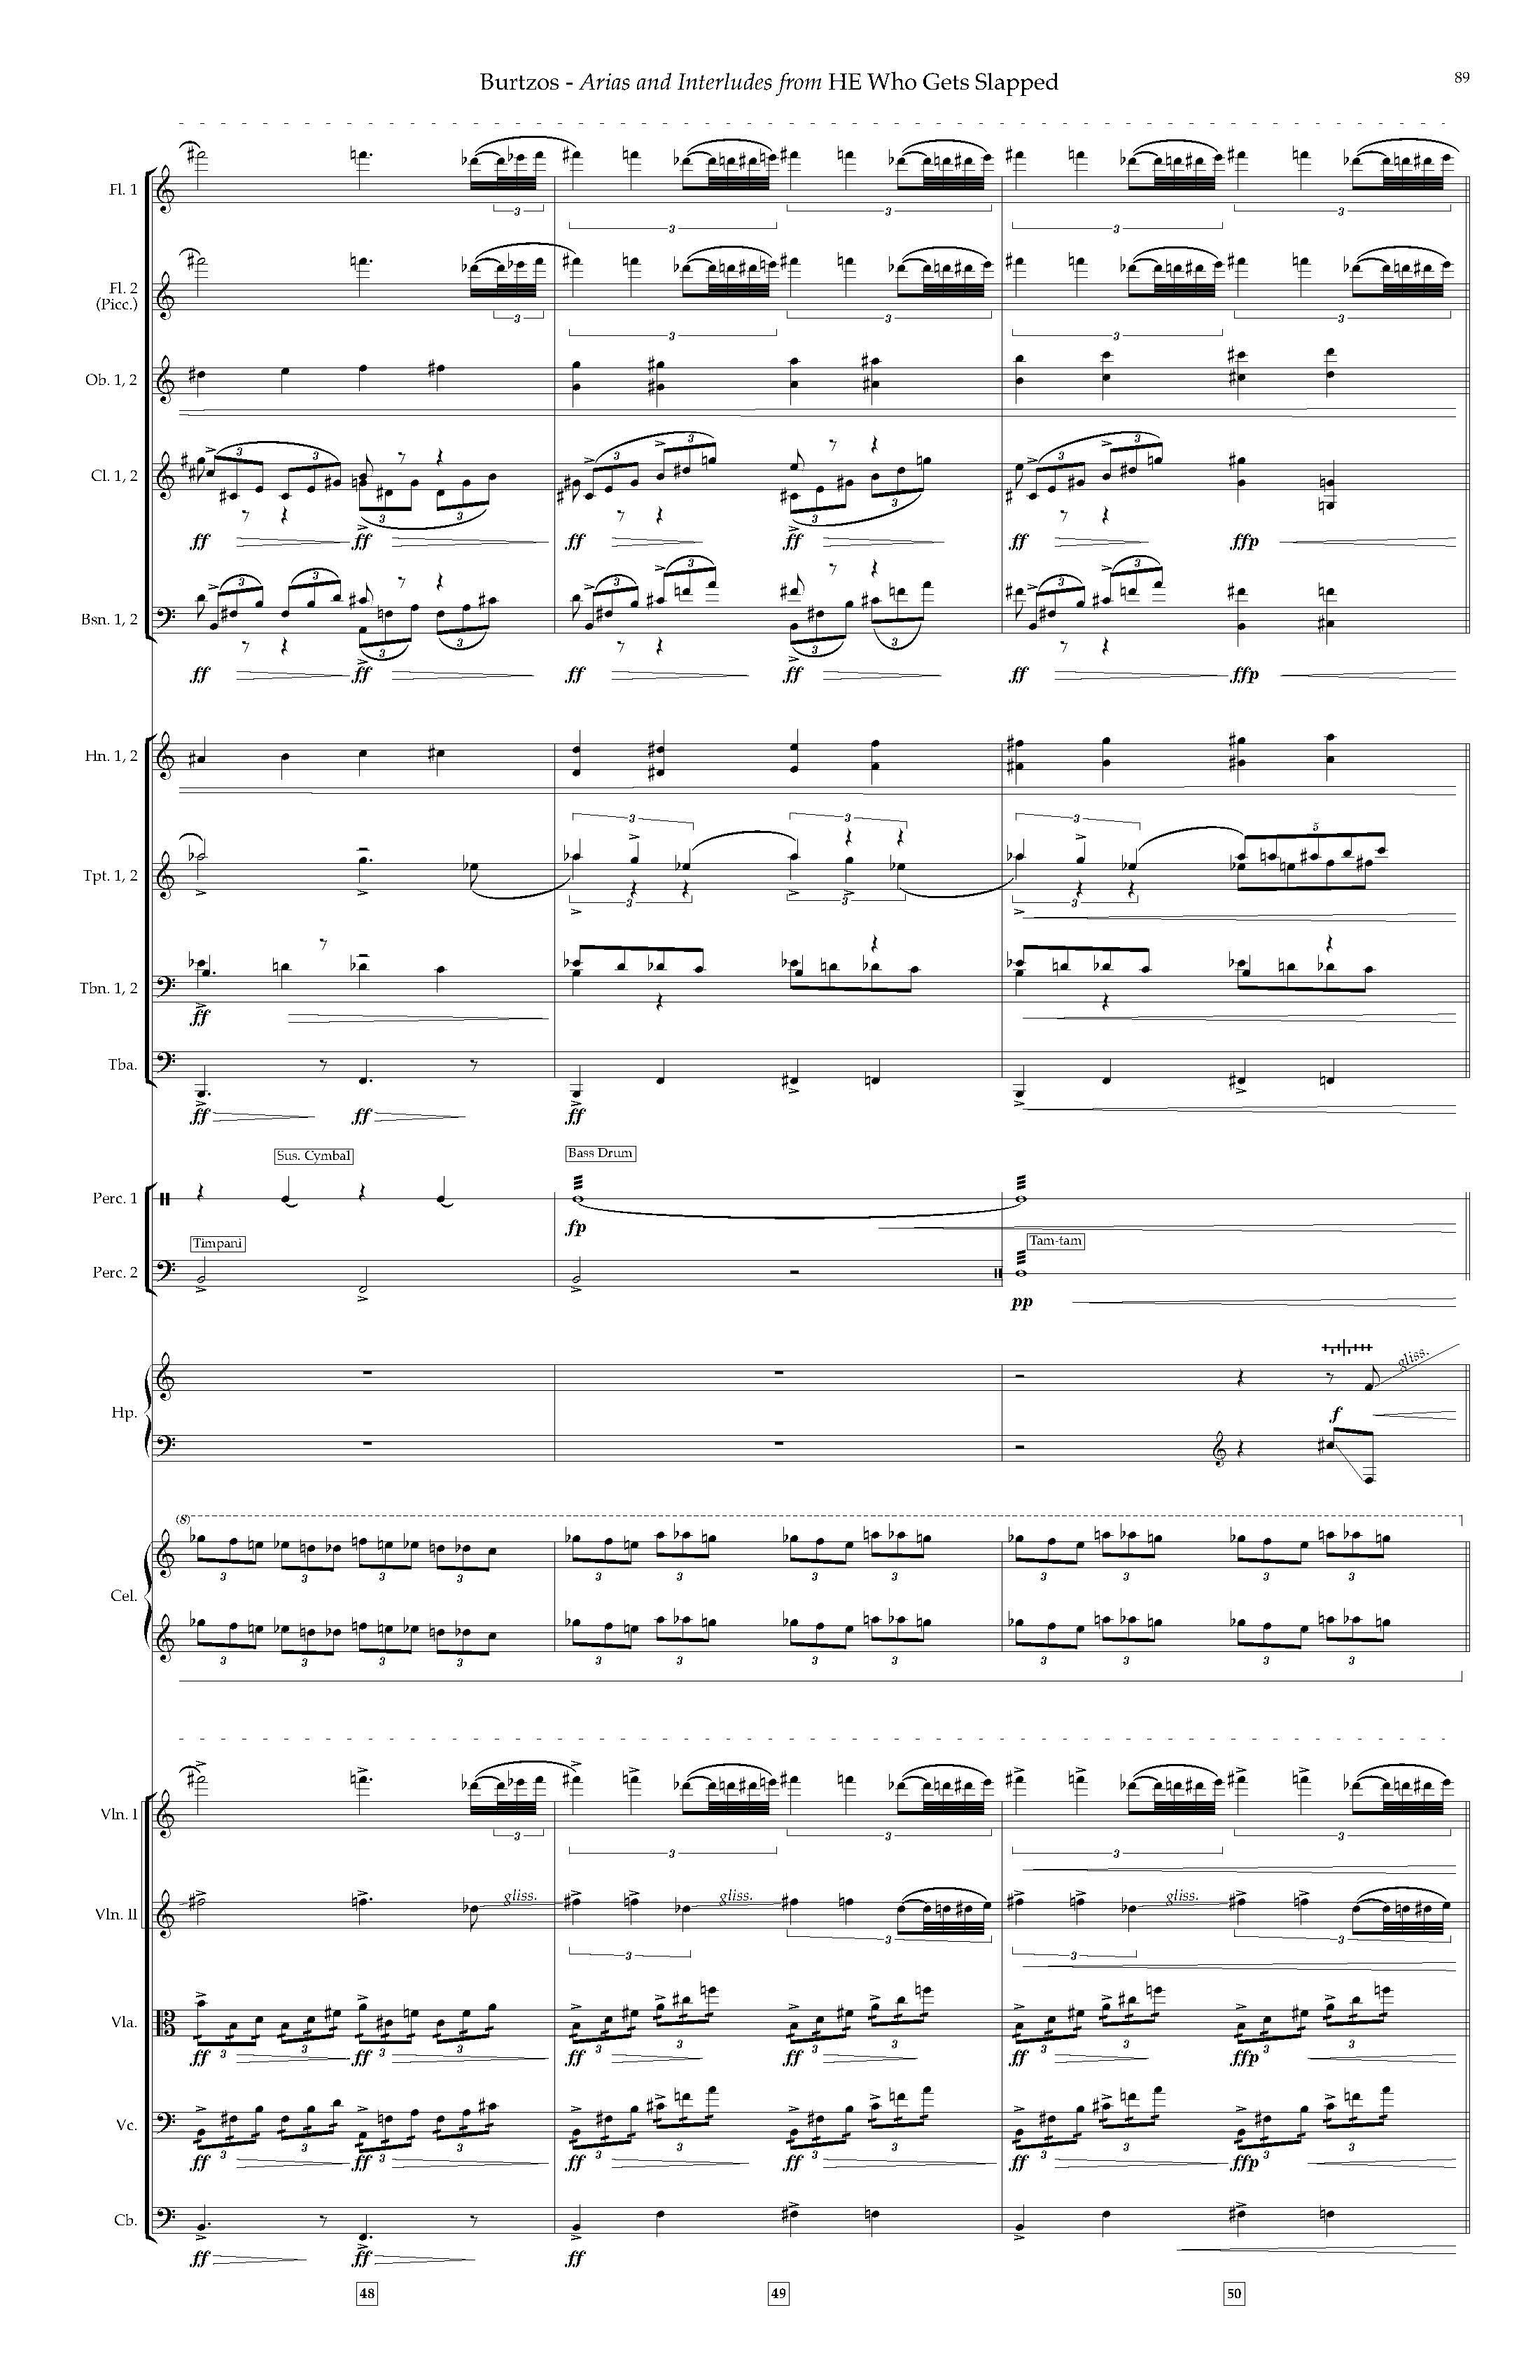 Arias and Interludes from HWGS - Complete Score_Page_95.jpg